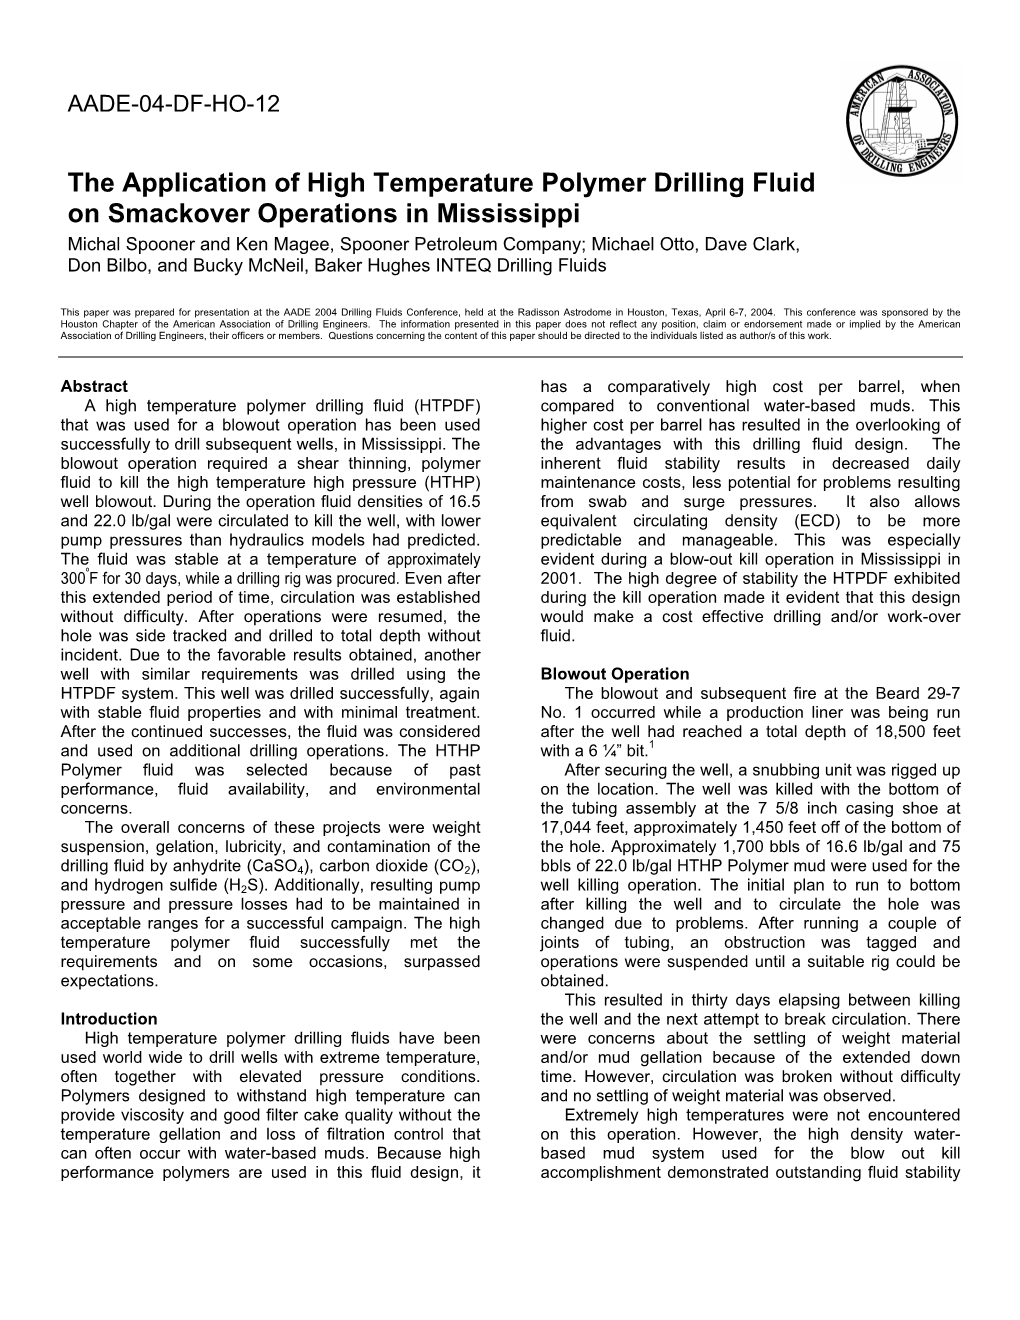 The Application of High Temperature Polymer Drilling Fluid On